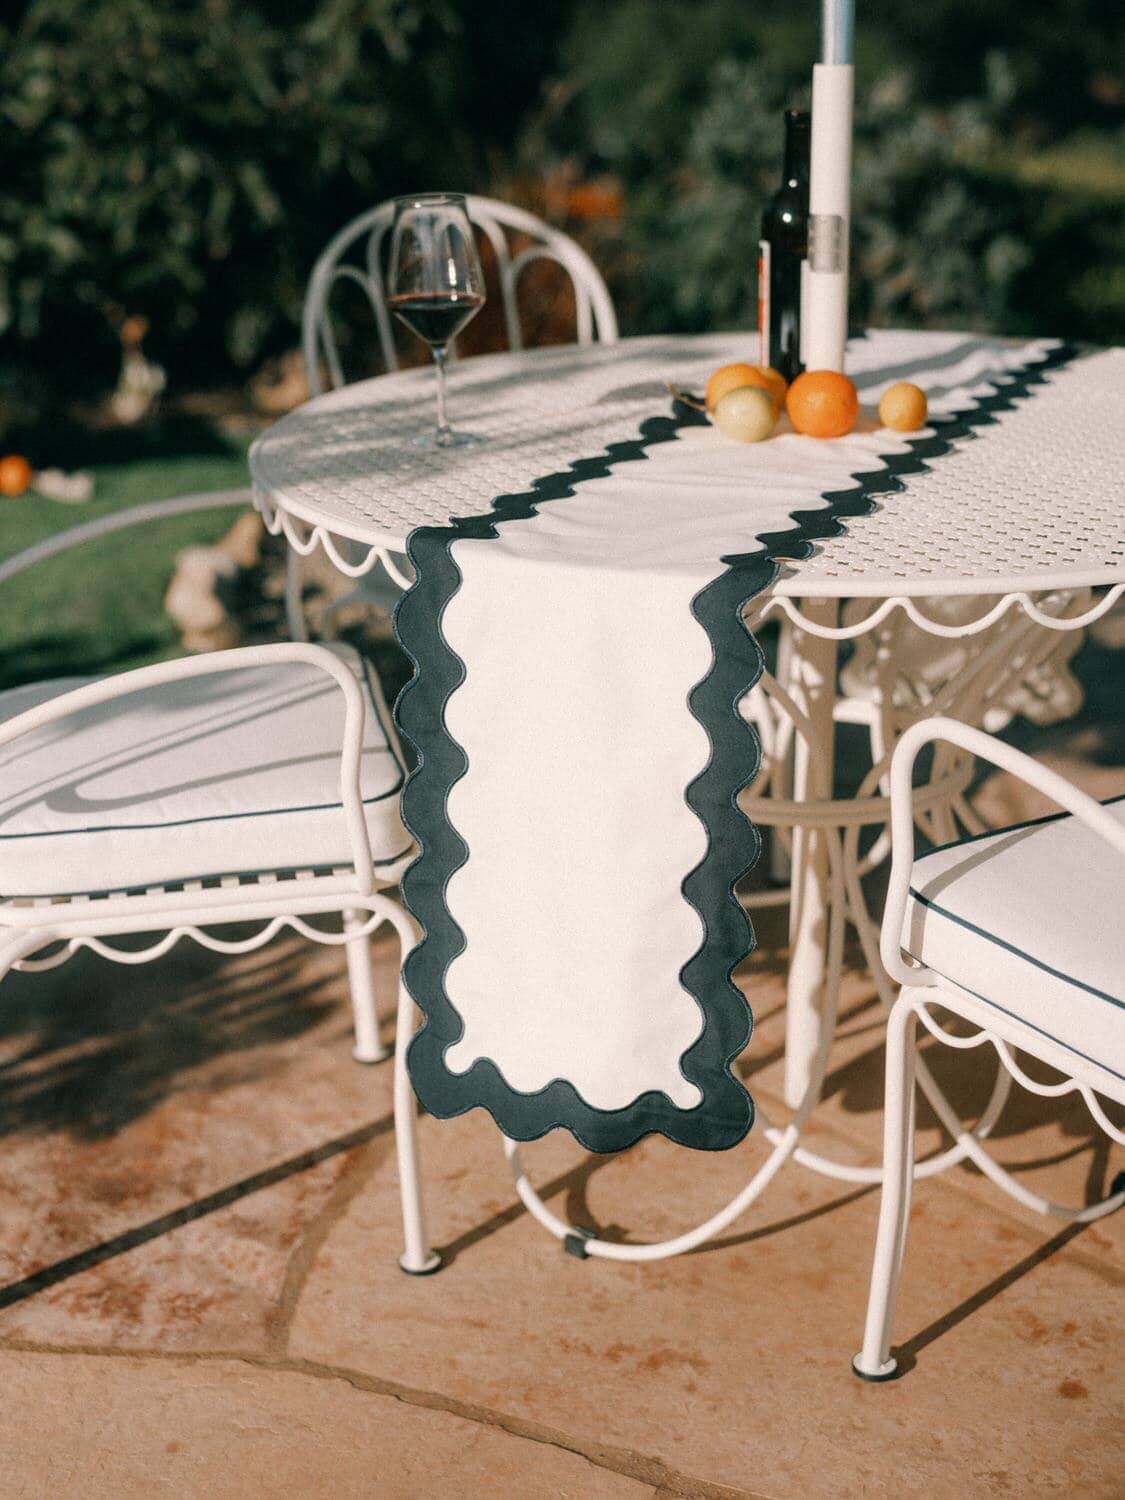 riviera white table runner draped over an outdoor table